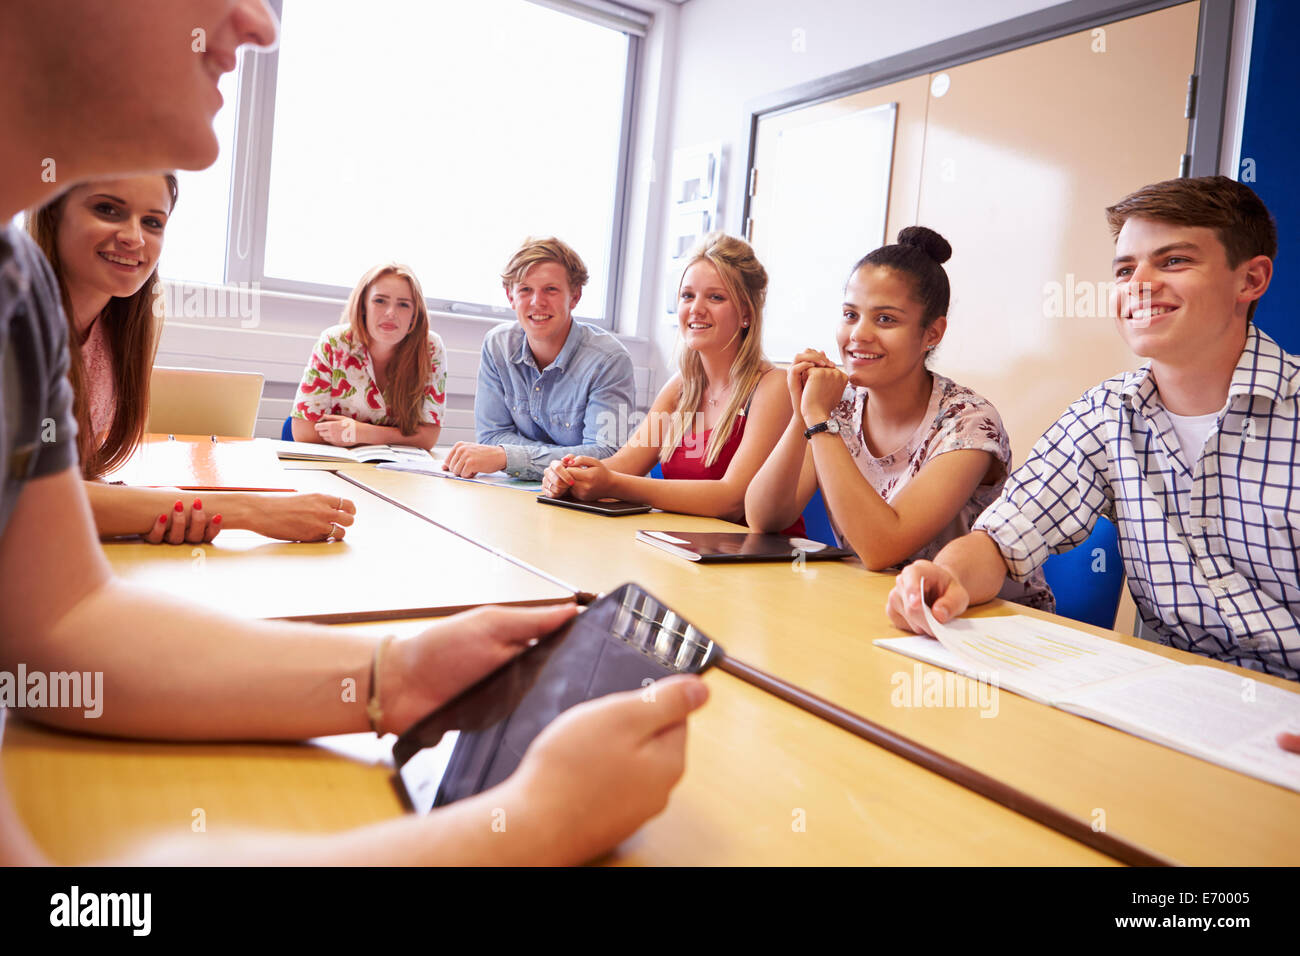 Group Of College Students Sitting At Table Having Discussion Stock Photo